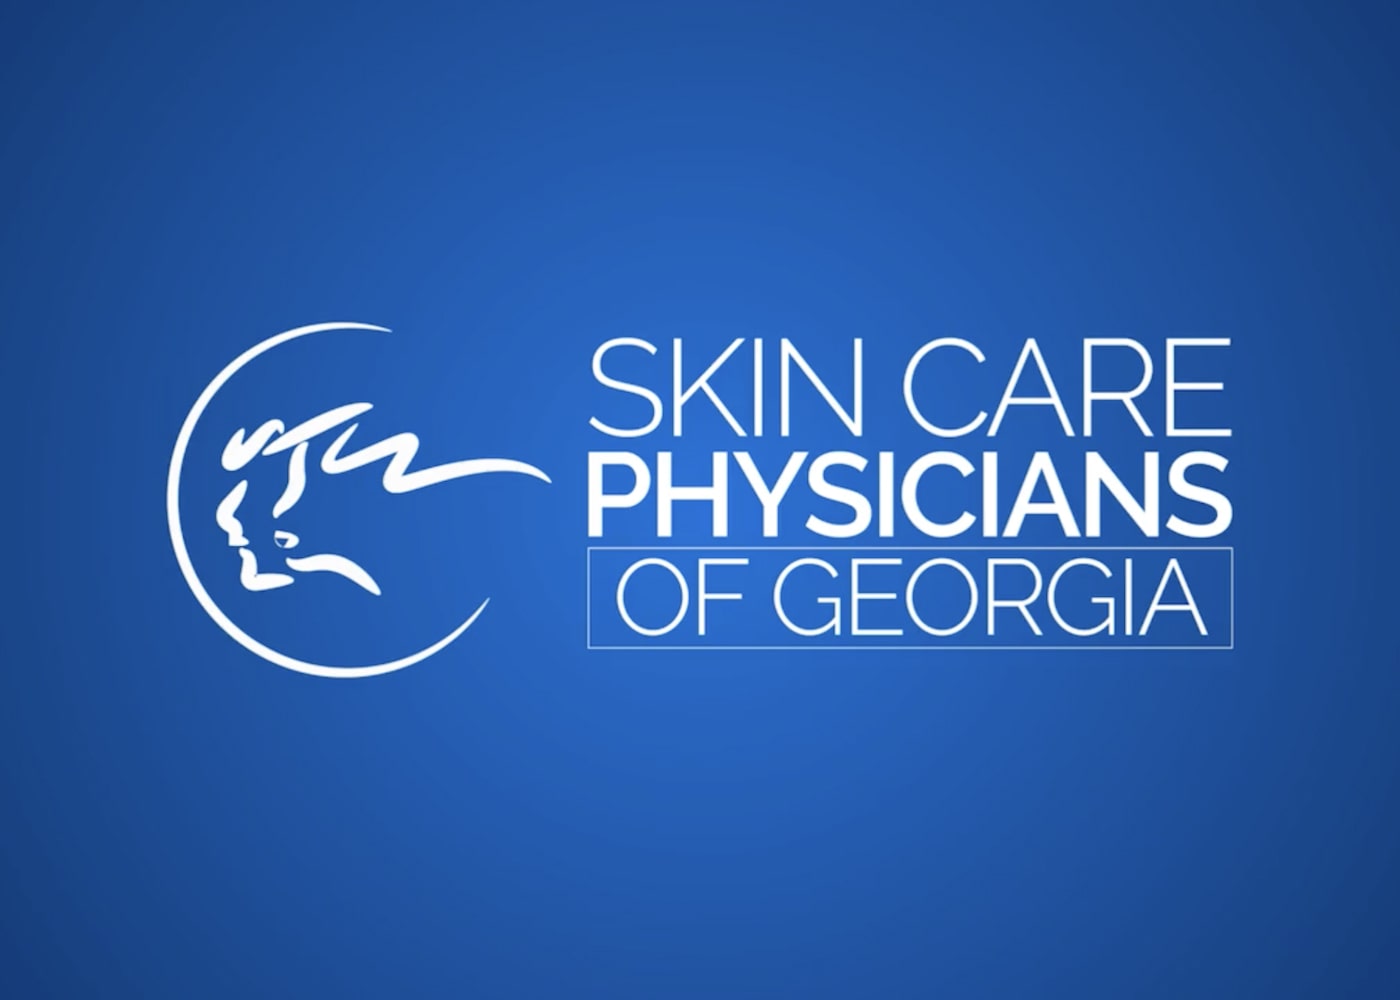 Video Strategies Skin Care Physicians of Georgia by Morgan and Wilbourn